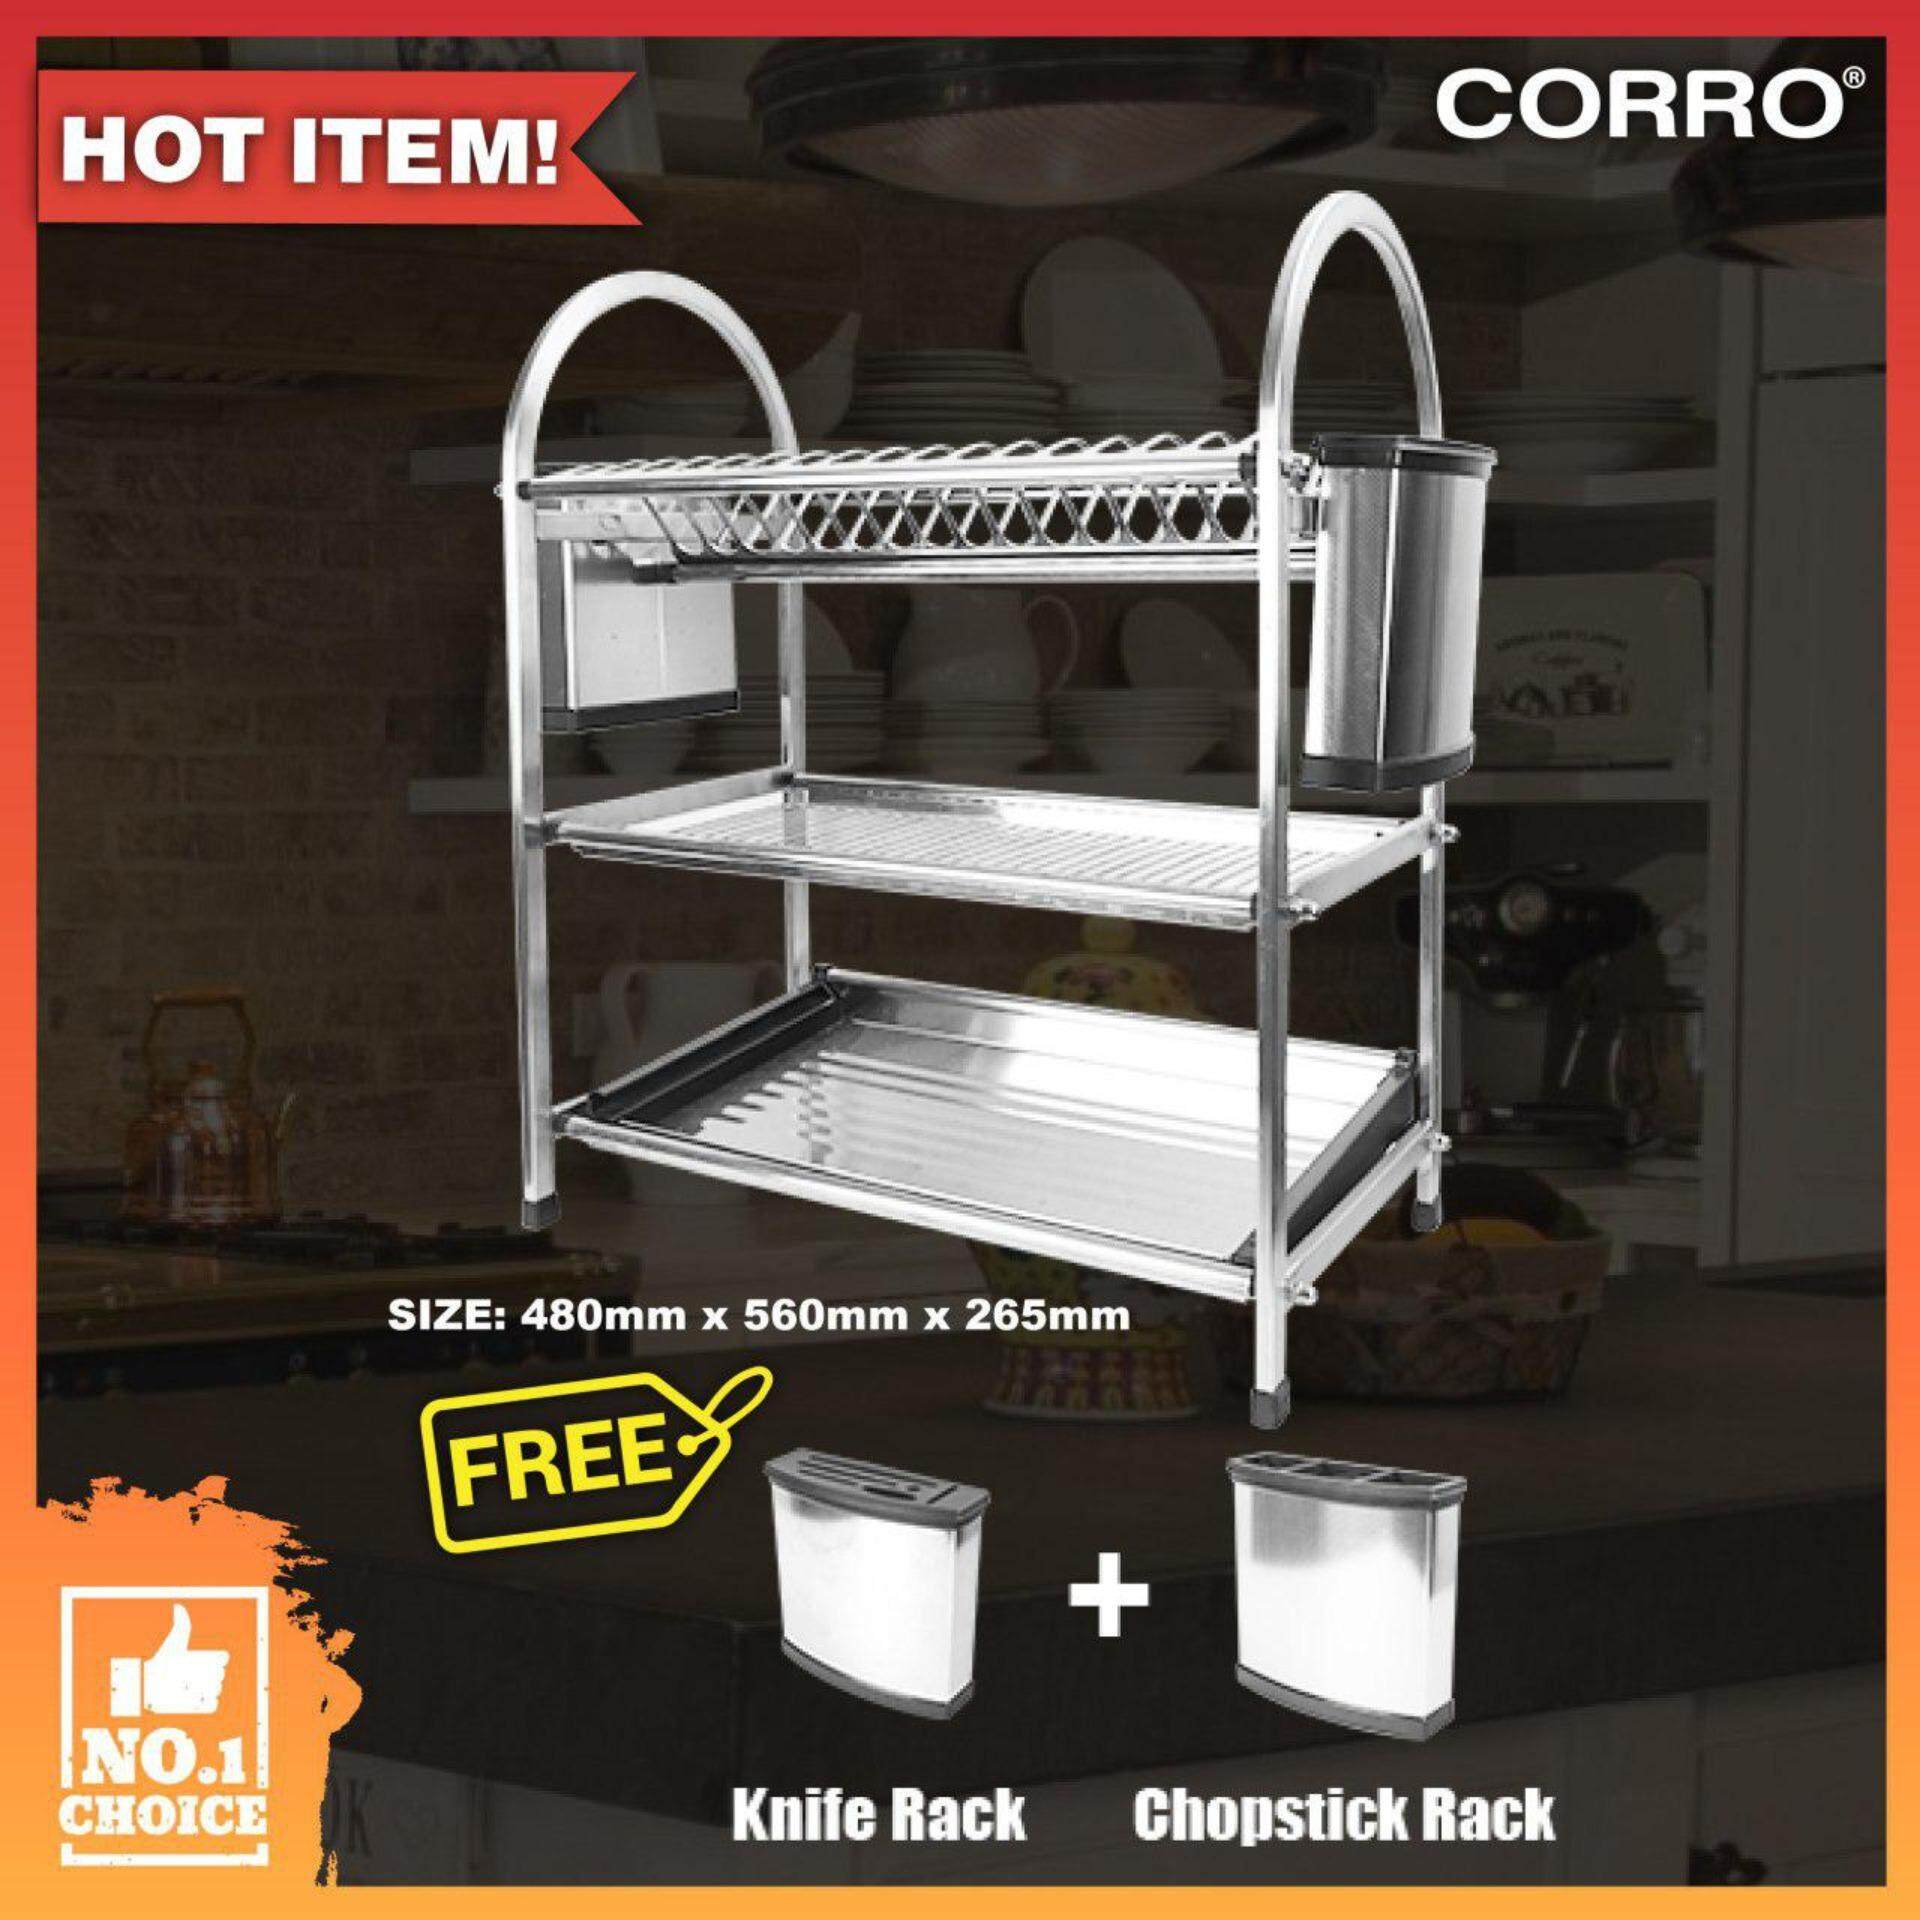 CORRO High Quality SUS304 100% Stainless Steel 3 Tier Dish Rack - L480 x H560 x W265mm